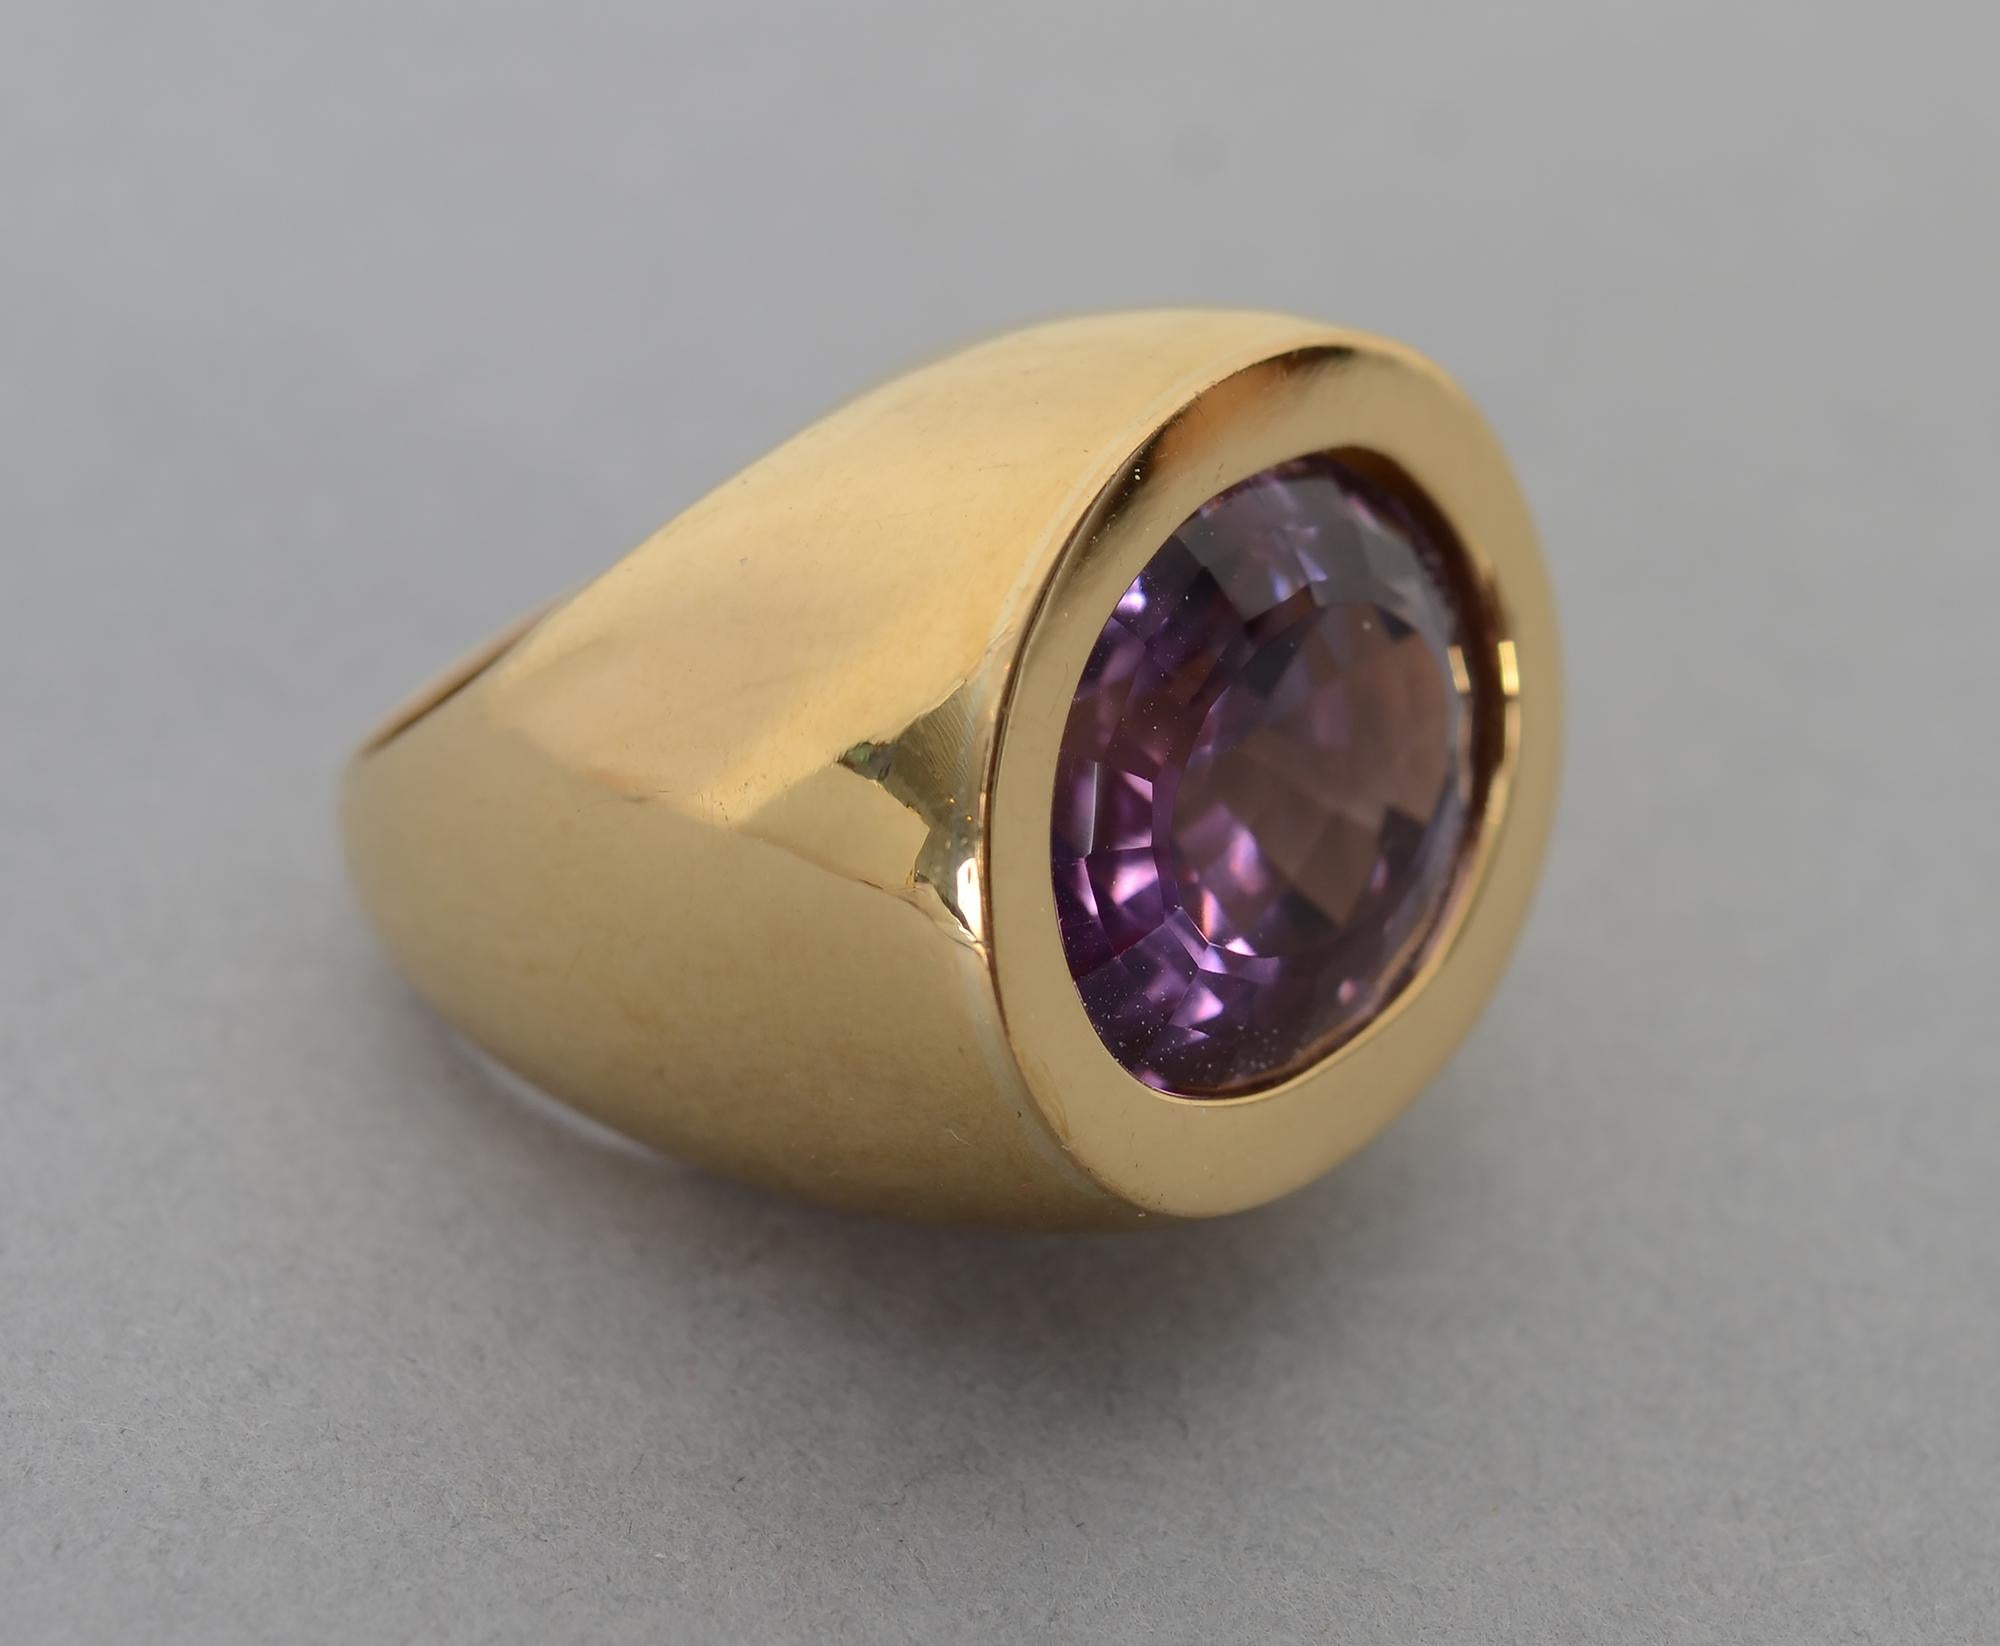 Powerful 18 karat gold ring set with a faceted amethyst of approximately 30 carats.The bezel is set horizontally. The face measures 13/16